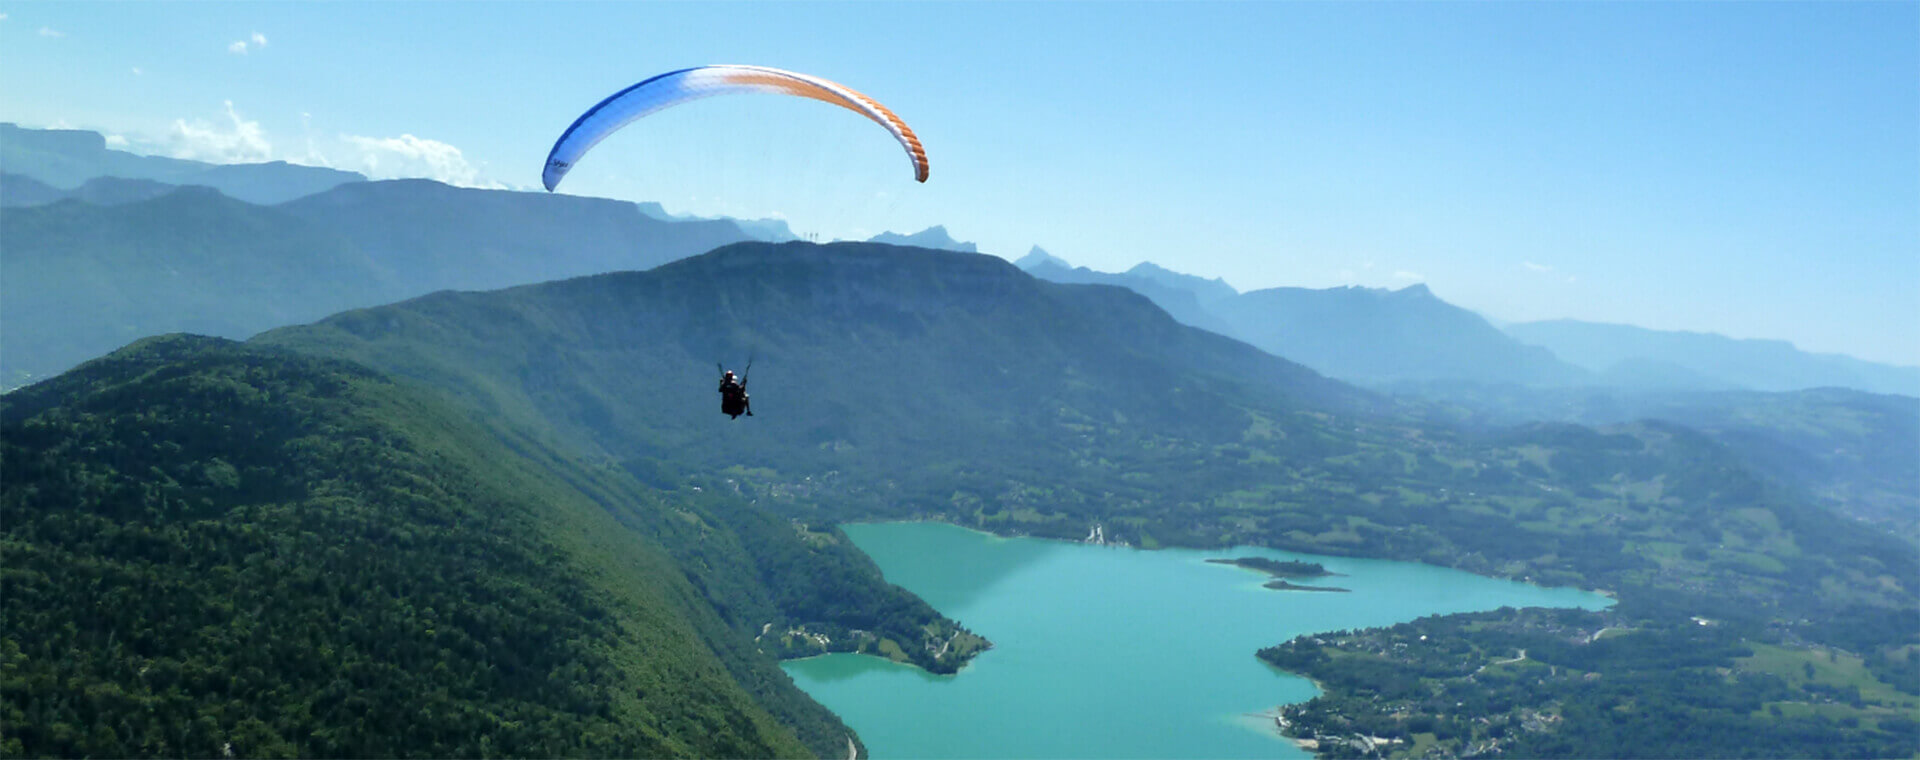 Paragliding, outdoor sports activity in Savoy